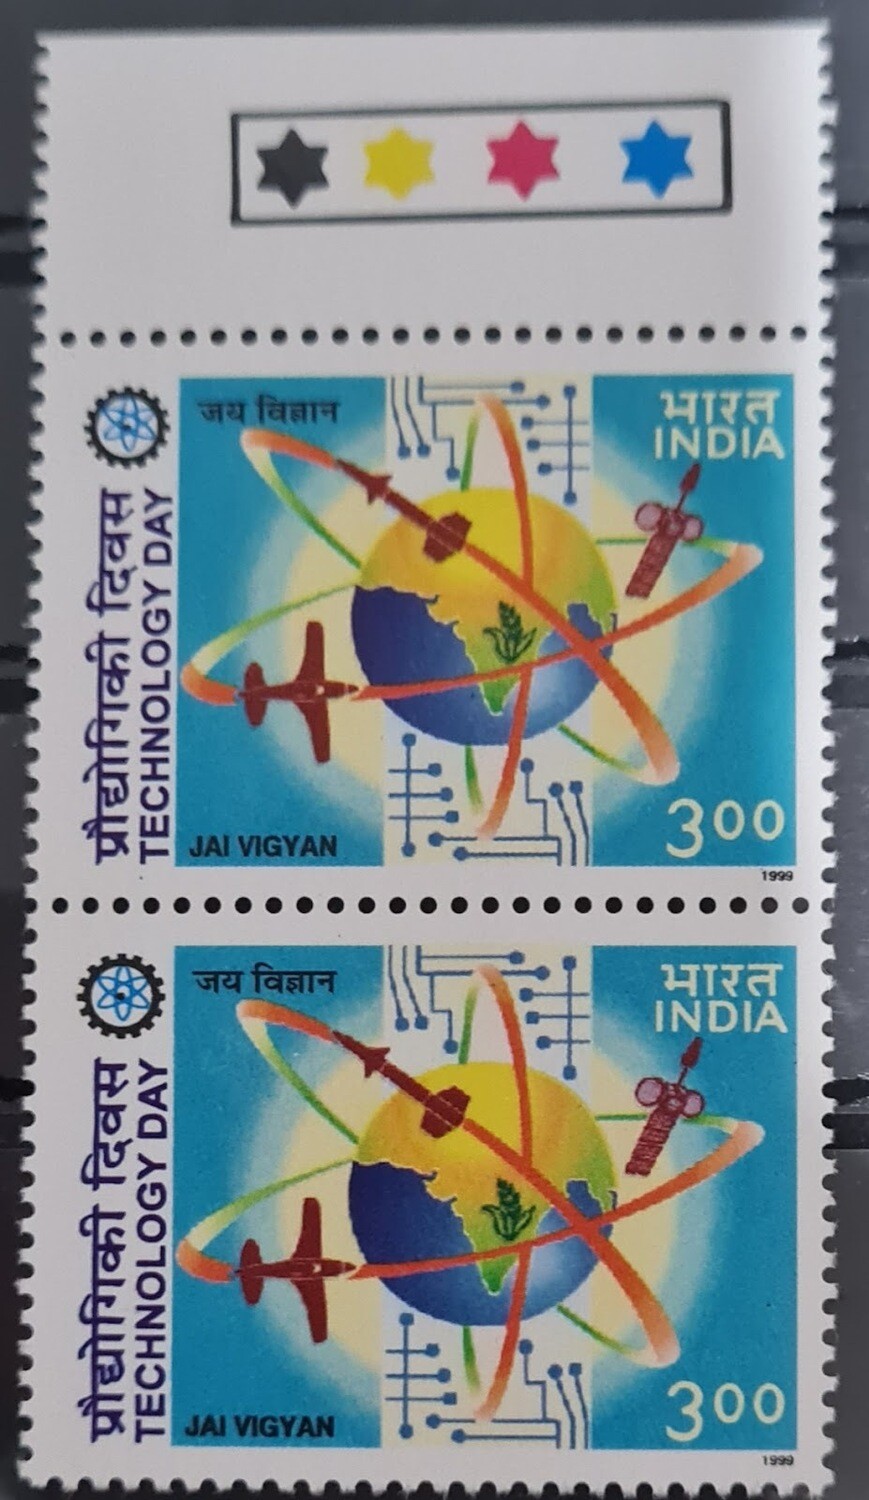 INDIA-NATIONAL TECHNOLOGY DAY JAI VIGYAN 1999 MNH pair of stamps with traffic lights